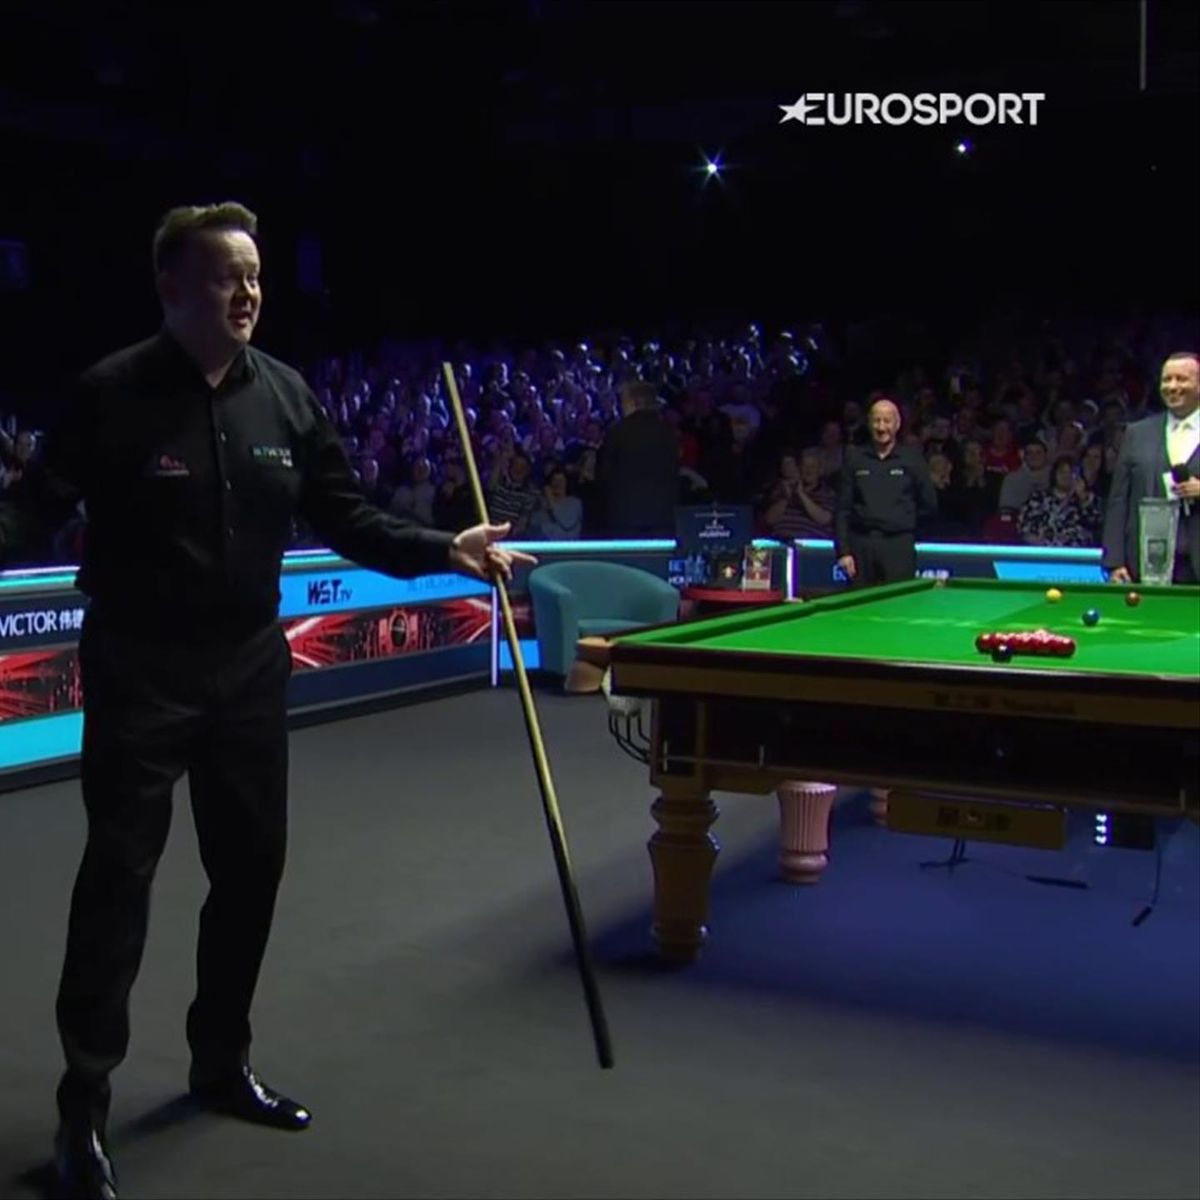 WATCH - Shaun Murphy lives up to promise and MOONWALKS into arena for Welsh Open final - Snooker video